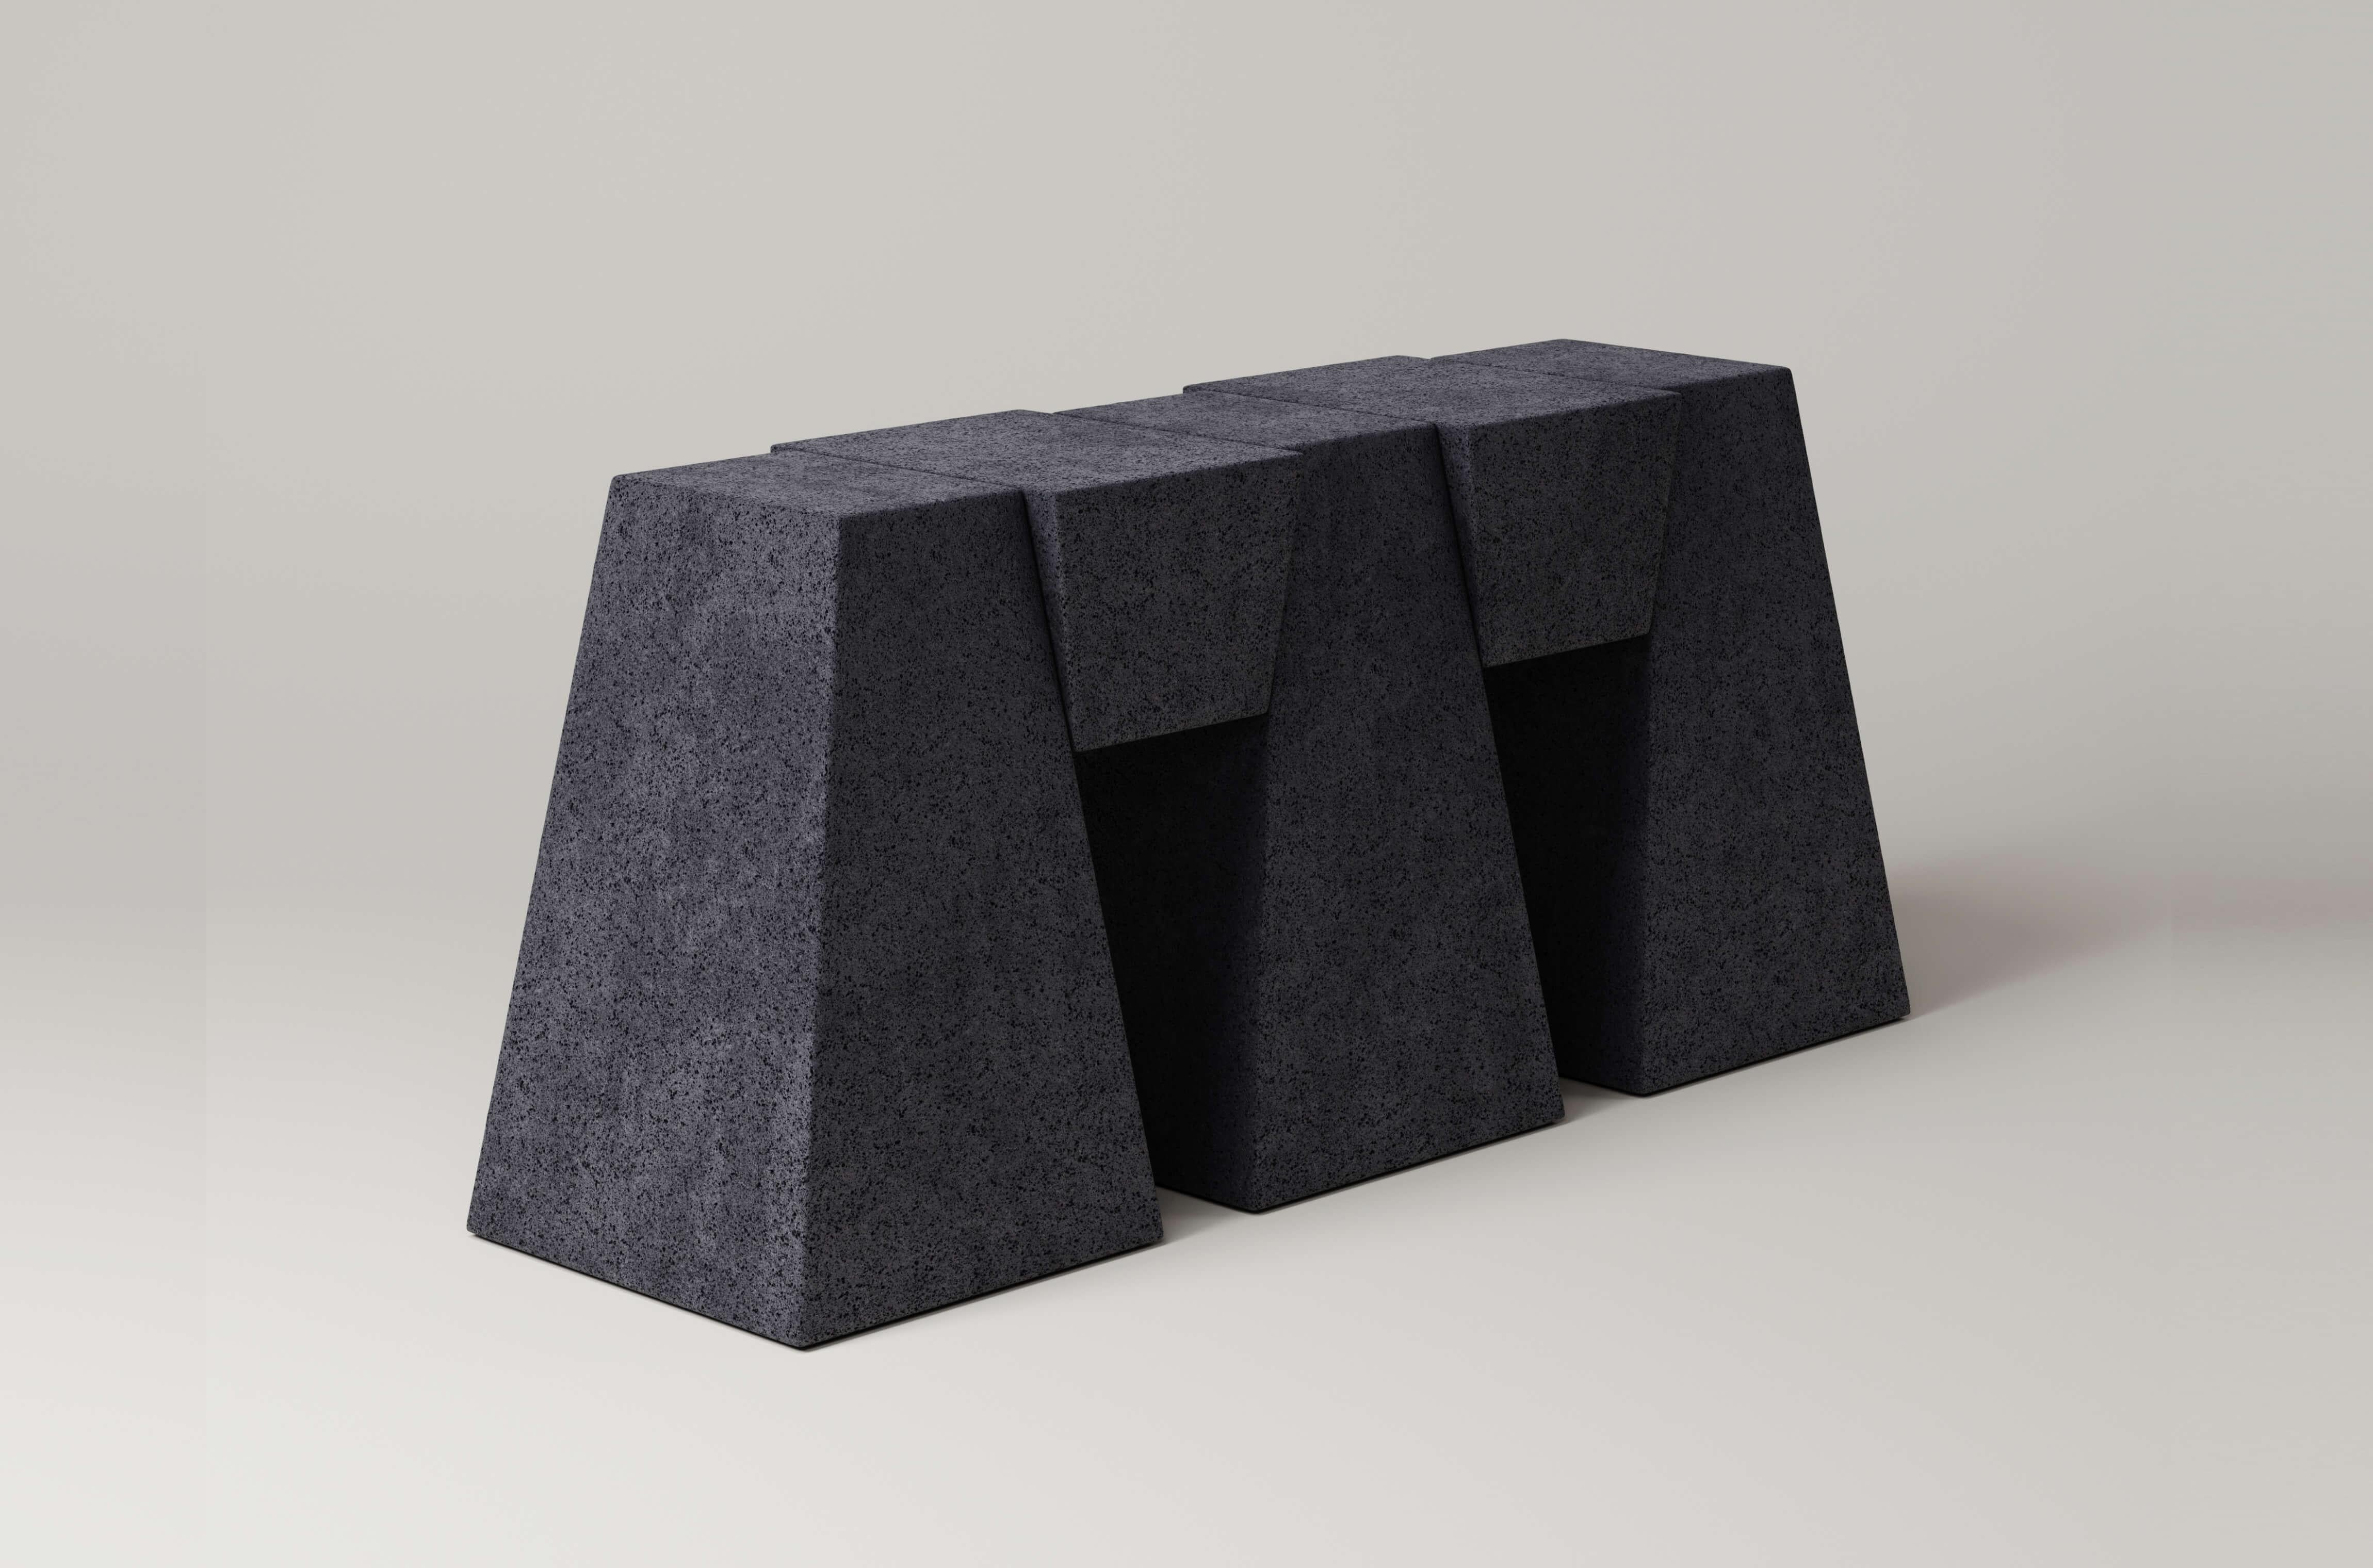 M_006 Lava Rock Console by Monolith Studio
Signed and Numbered.
Dimensions: D 45 x W 165 x H 78 cm.
Materials: Lava rock.

Available in travertine, walnut, white oak and lava rock.  Please contact us. 

Monolith, founded in 2022 by Marc Personick,